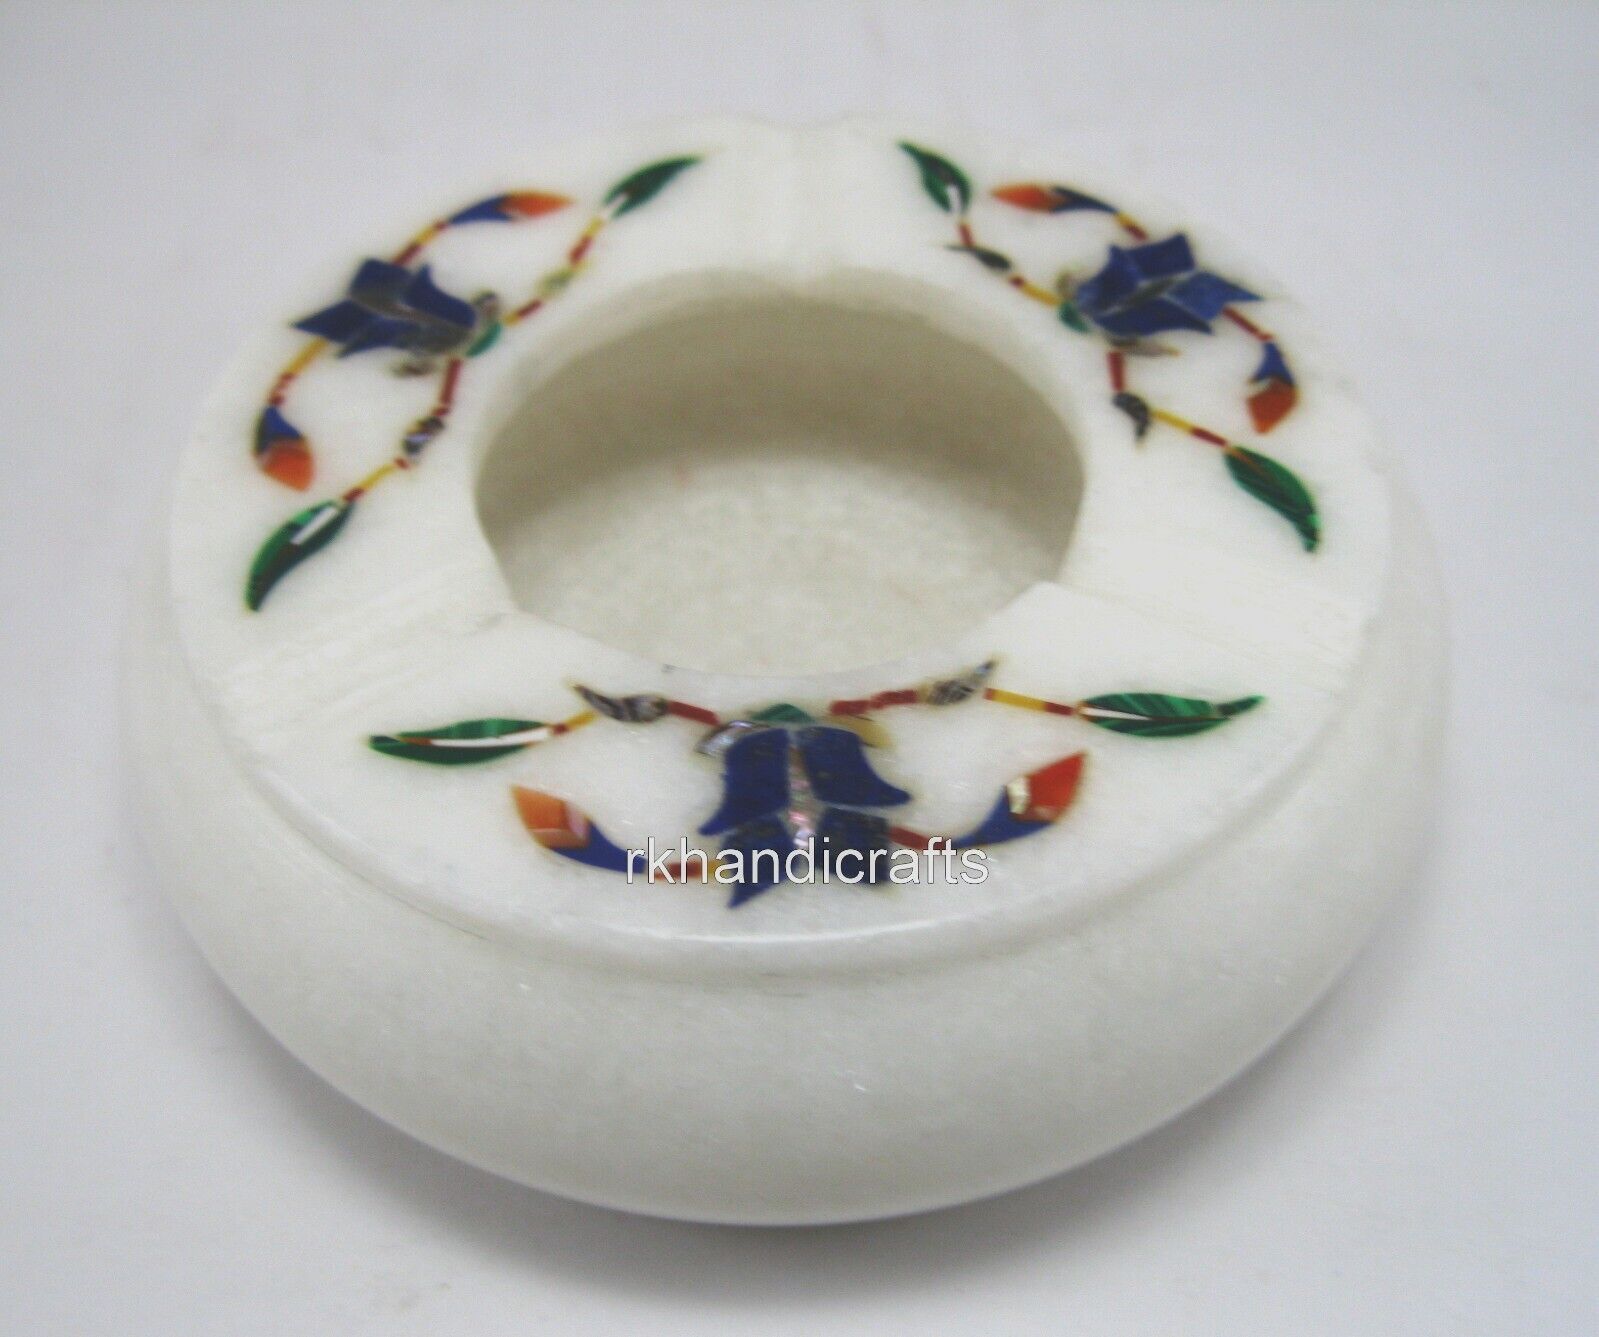 4 x 4 Inches Round Marble Decorative Ash Tray Pietra Dura Art Ash Tray for Hotel